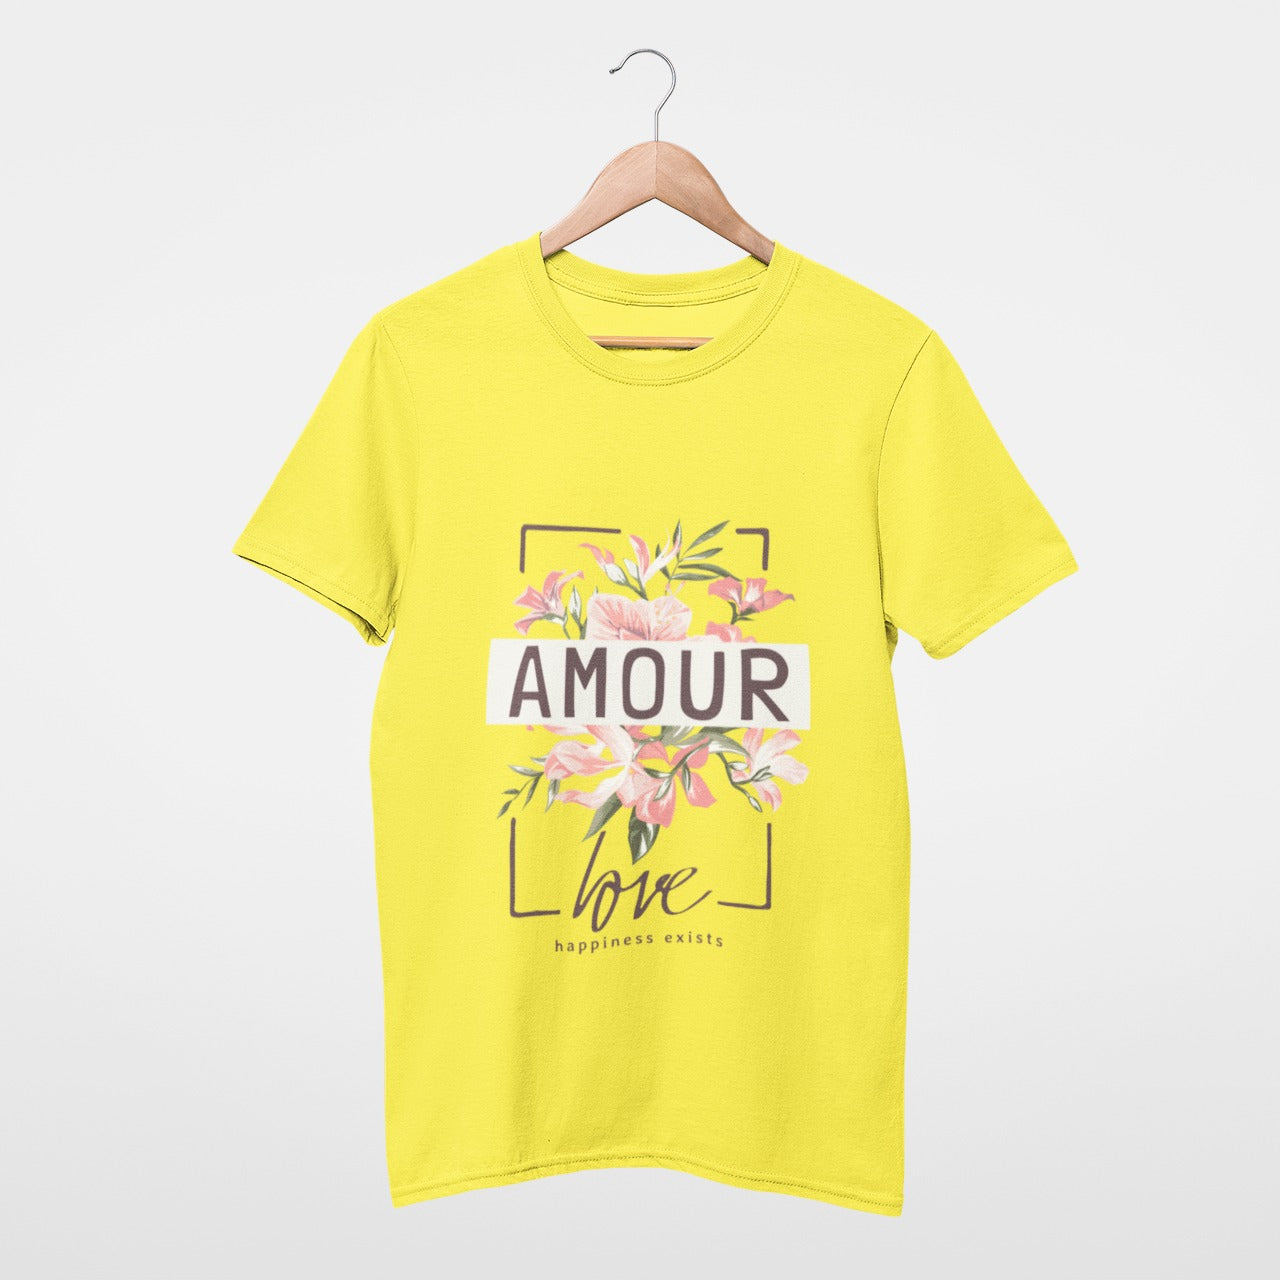 Amour Love happiness exists Tee